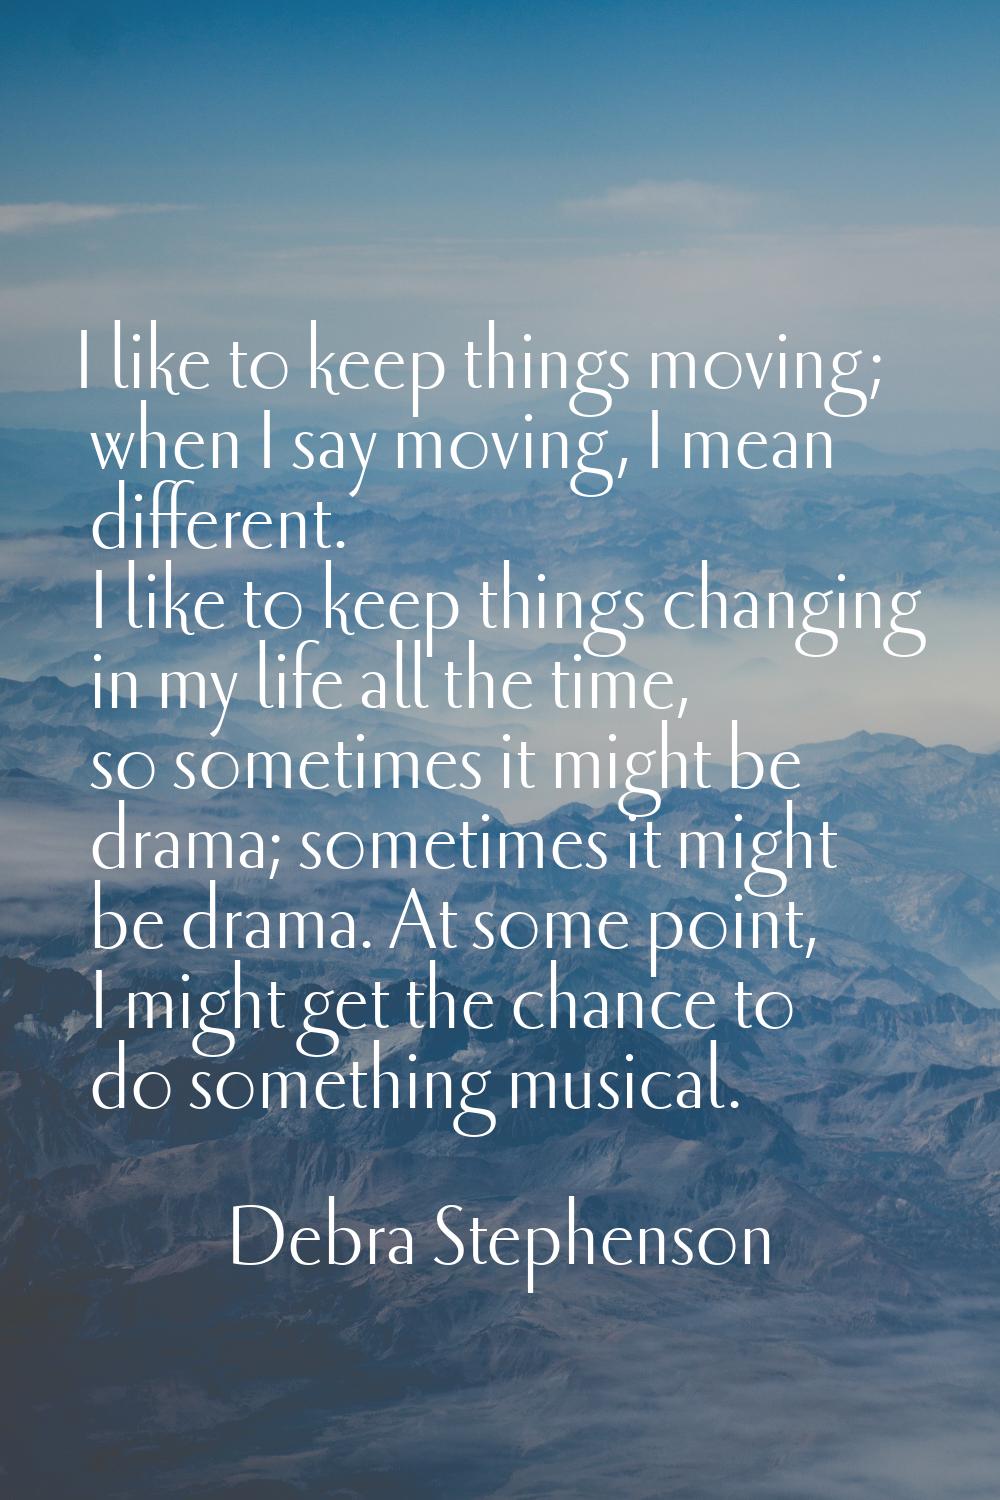 I like to keep things moving; when I say moving, I mean different. I like to keep things changing i